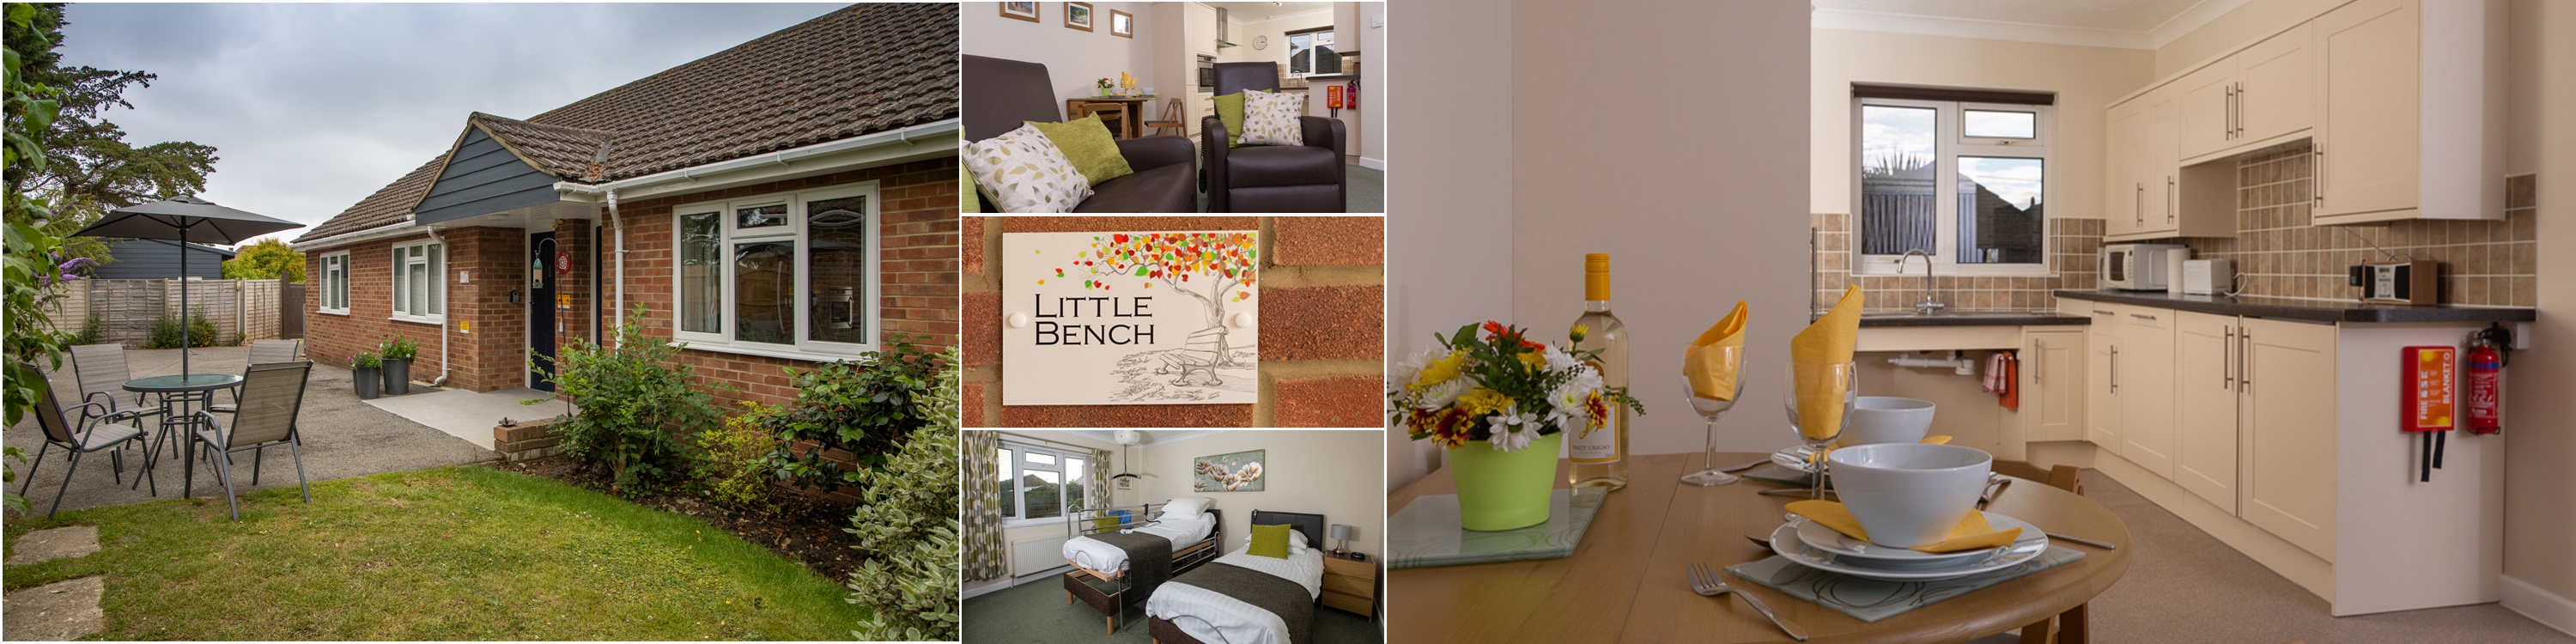 Little Bench - New Forest Accessible Accommodation